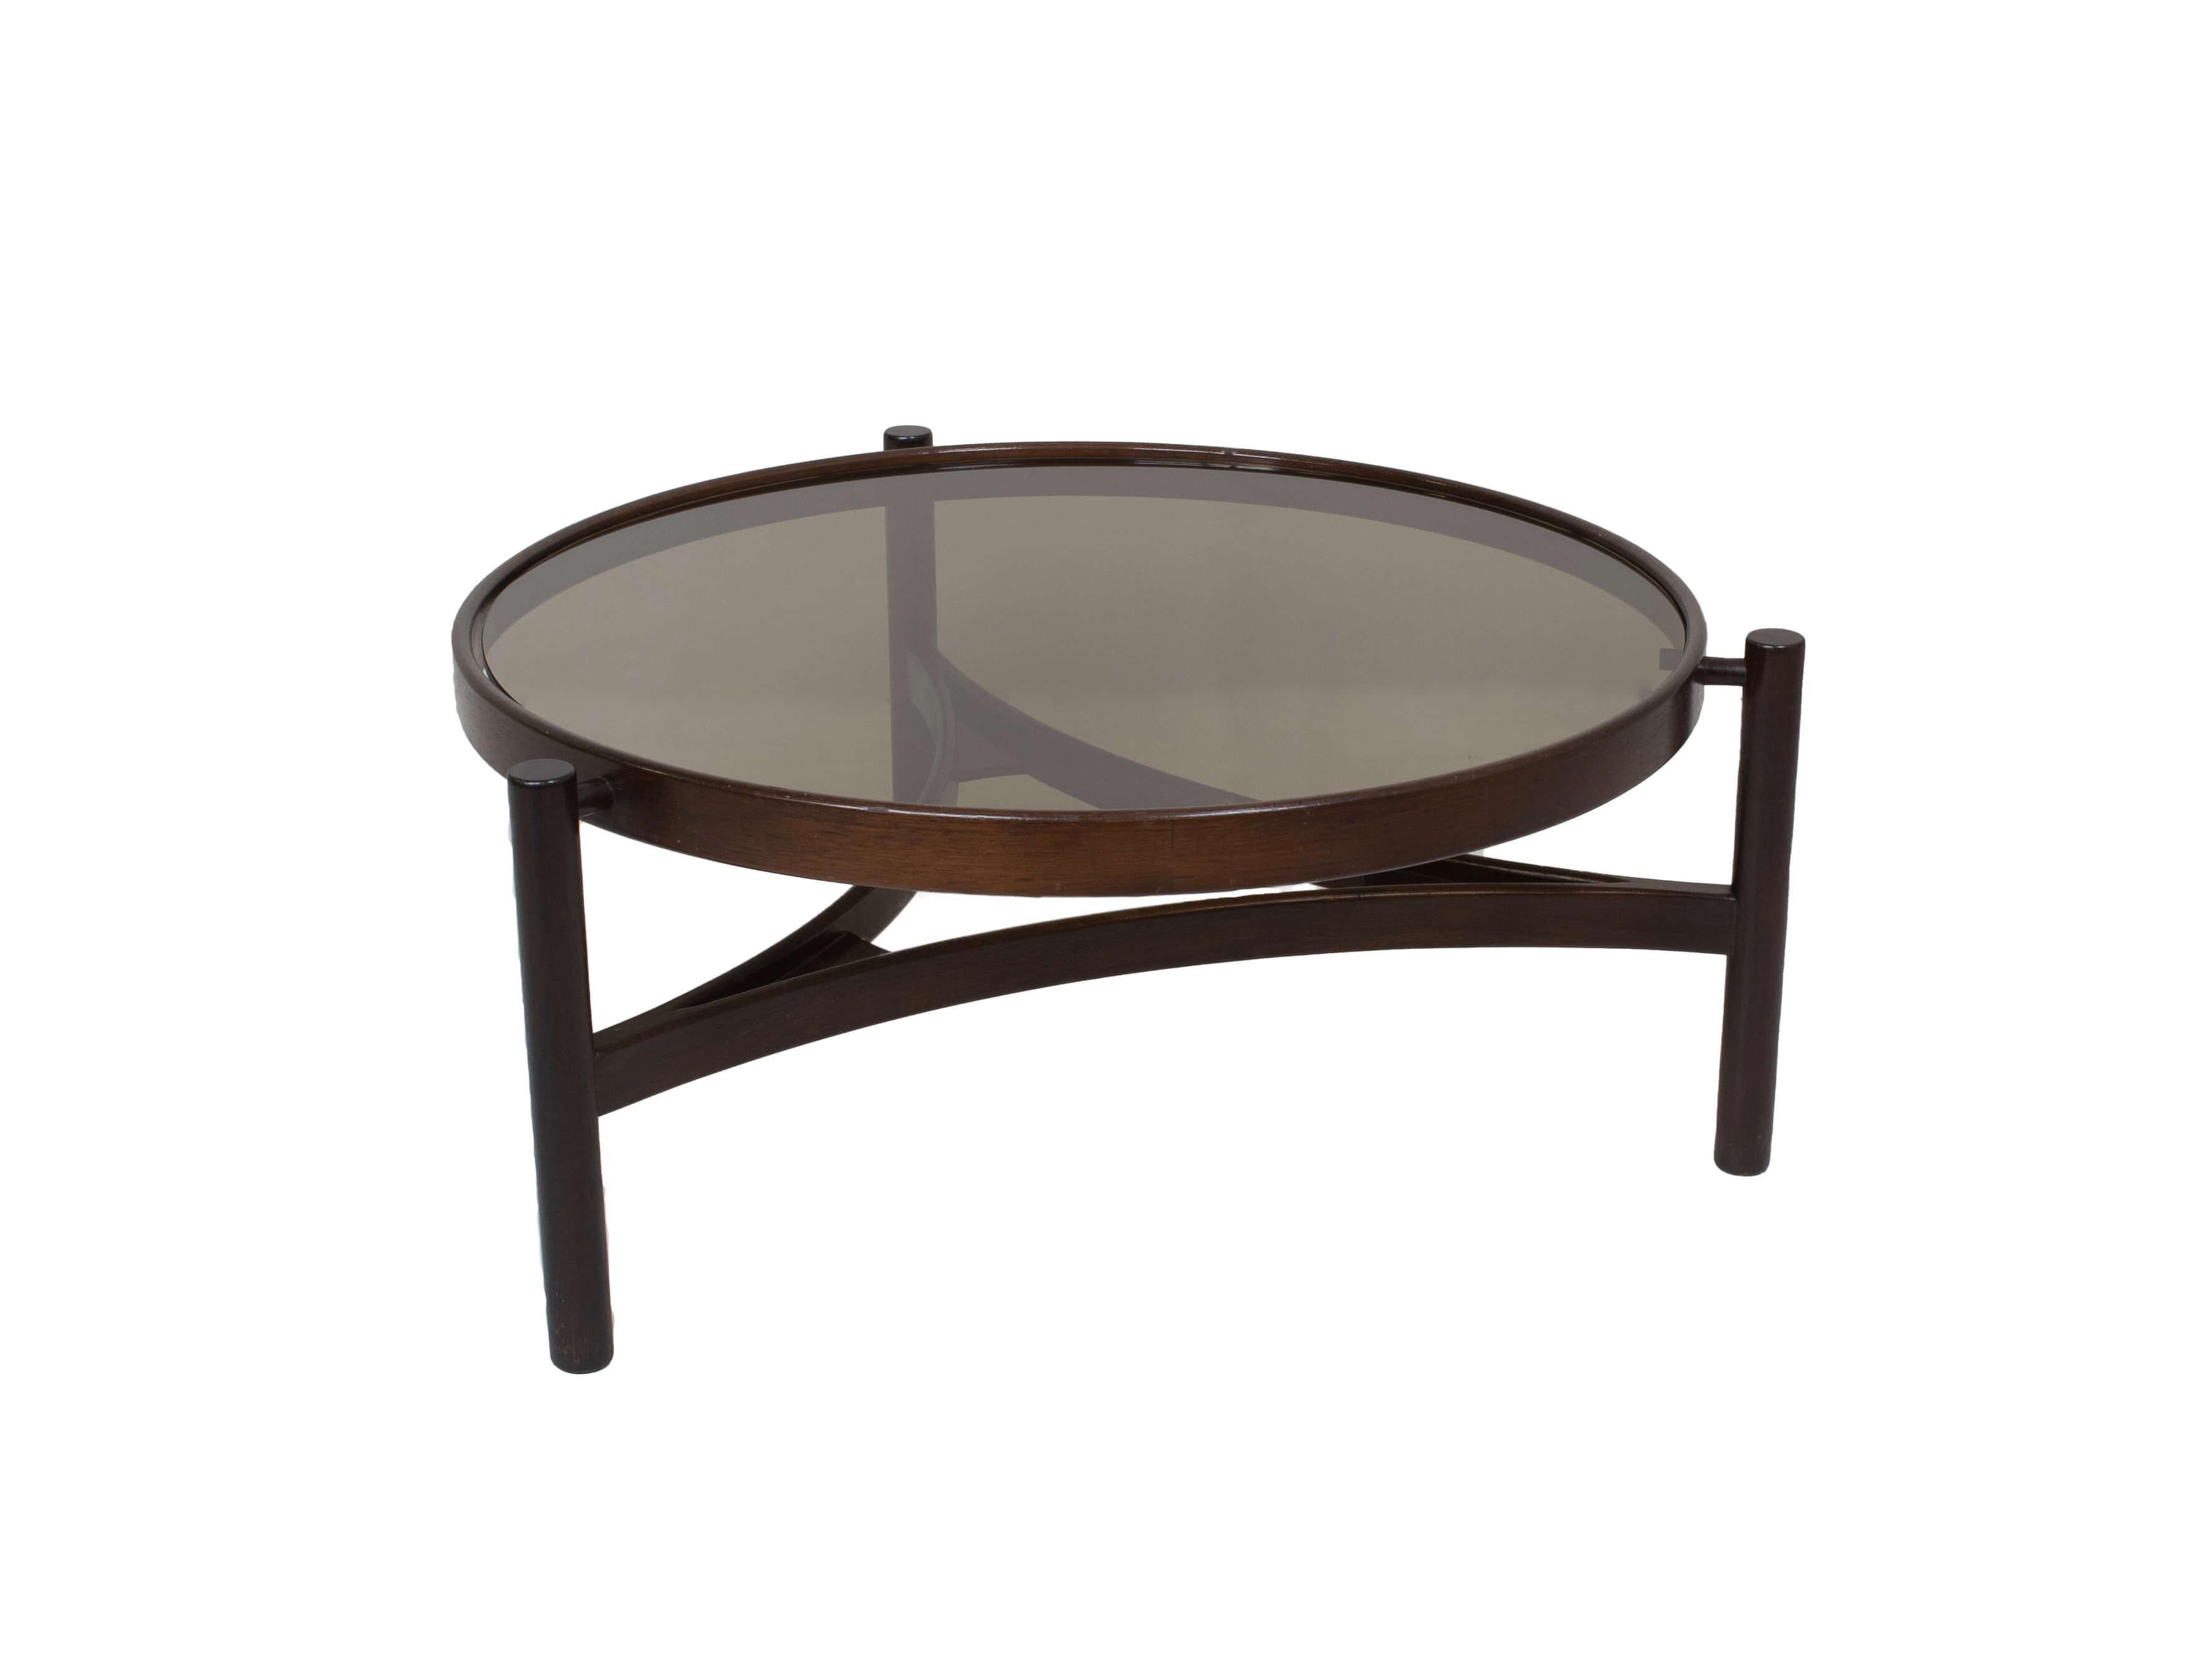 Round Italian modern coffee table by Gianfranco Frattini for Cassina from the 1960s. This beautiful Italian vintage design table, with model 775, has an exceptional design. It is made of walnut stained beech bentwood and has the original smoked